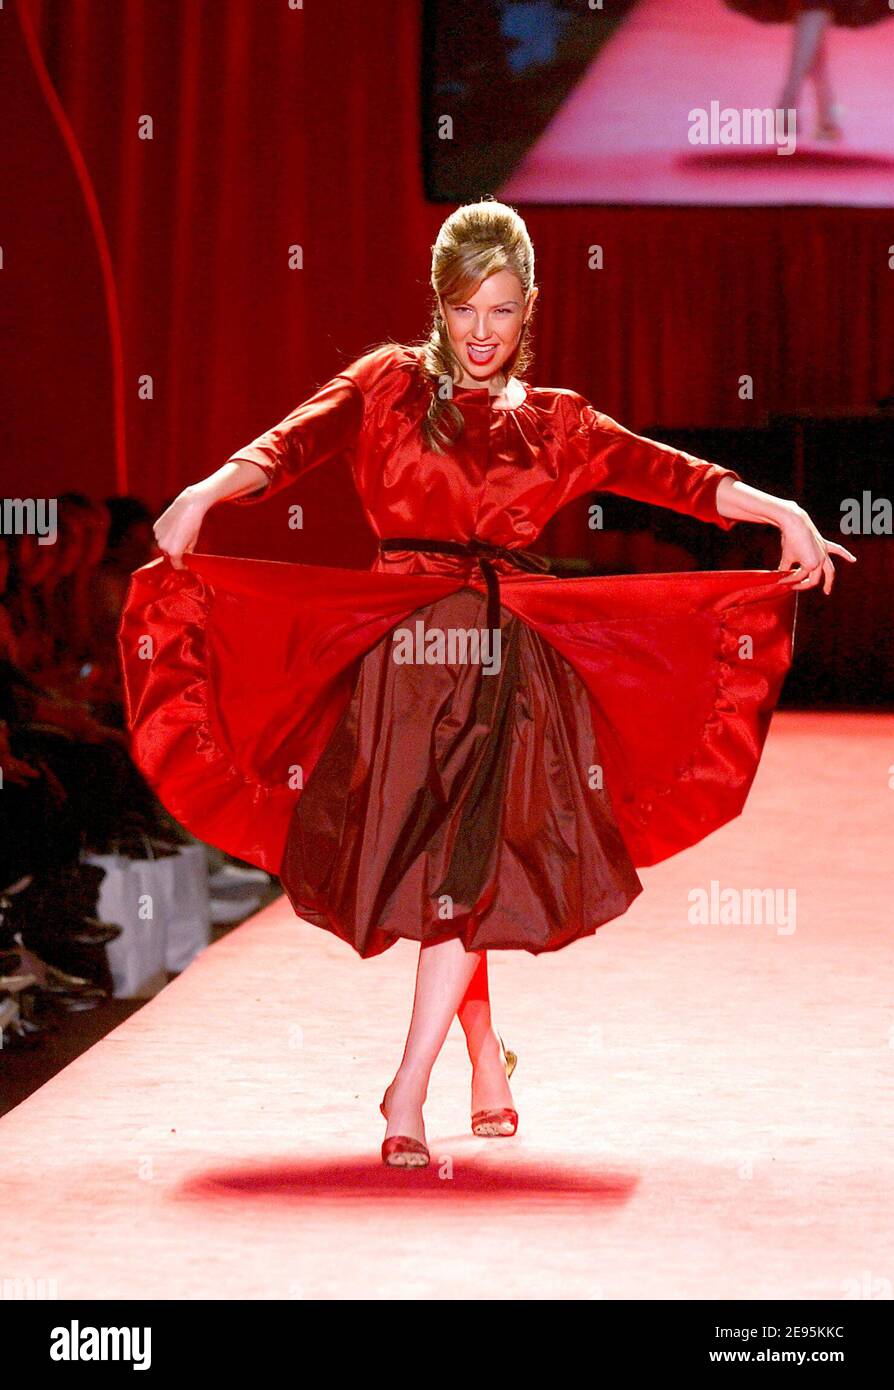 Latin Singer Thalia walks the runway at the Heart Truth Red Dress (for Women's heart disease charity) show during the Fall - Winter 2006 Olympus Fashion Week in New York on February 3, 2006. Photo by Nicolas Khayat/ABACAPRESS.COM Stock Photo